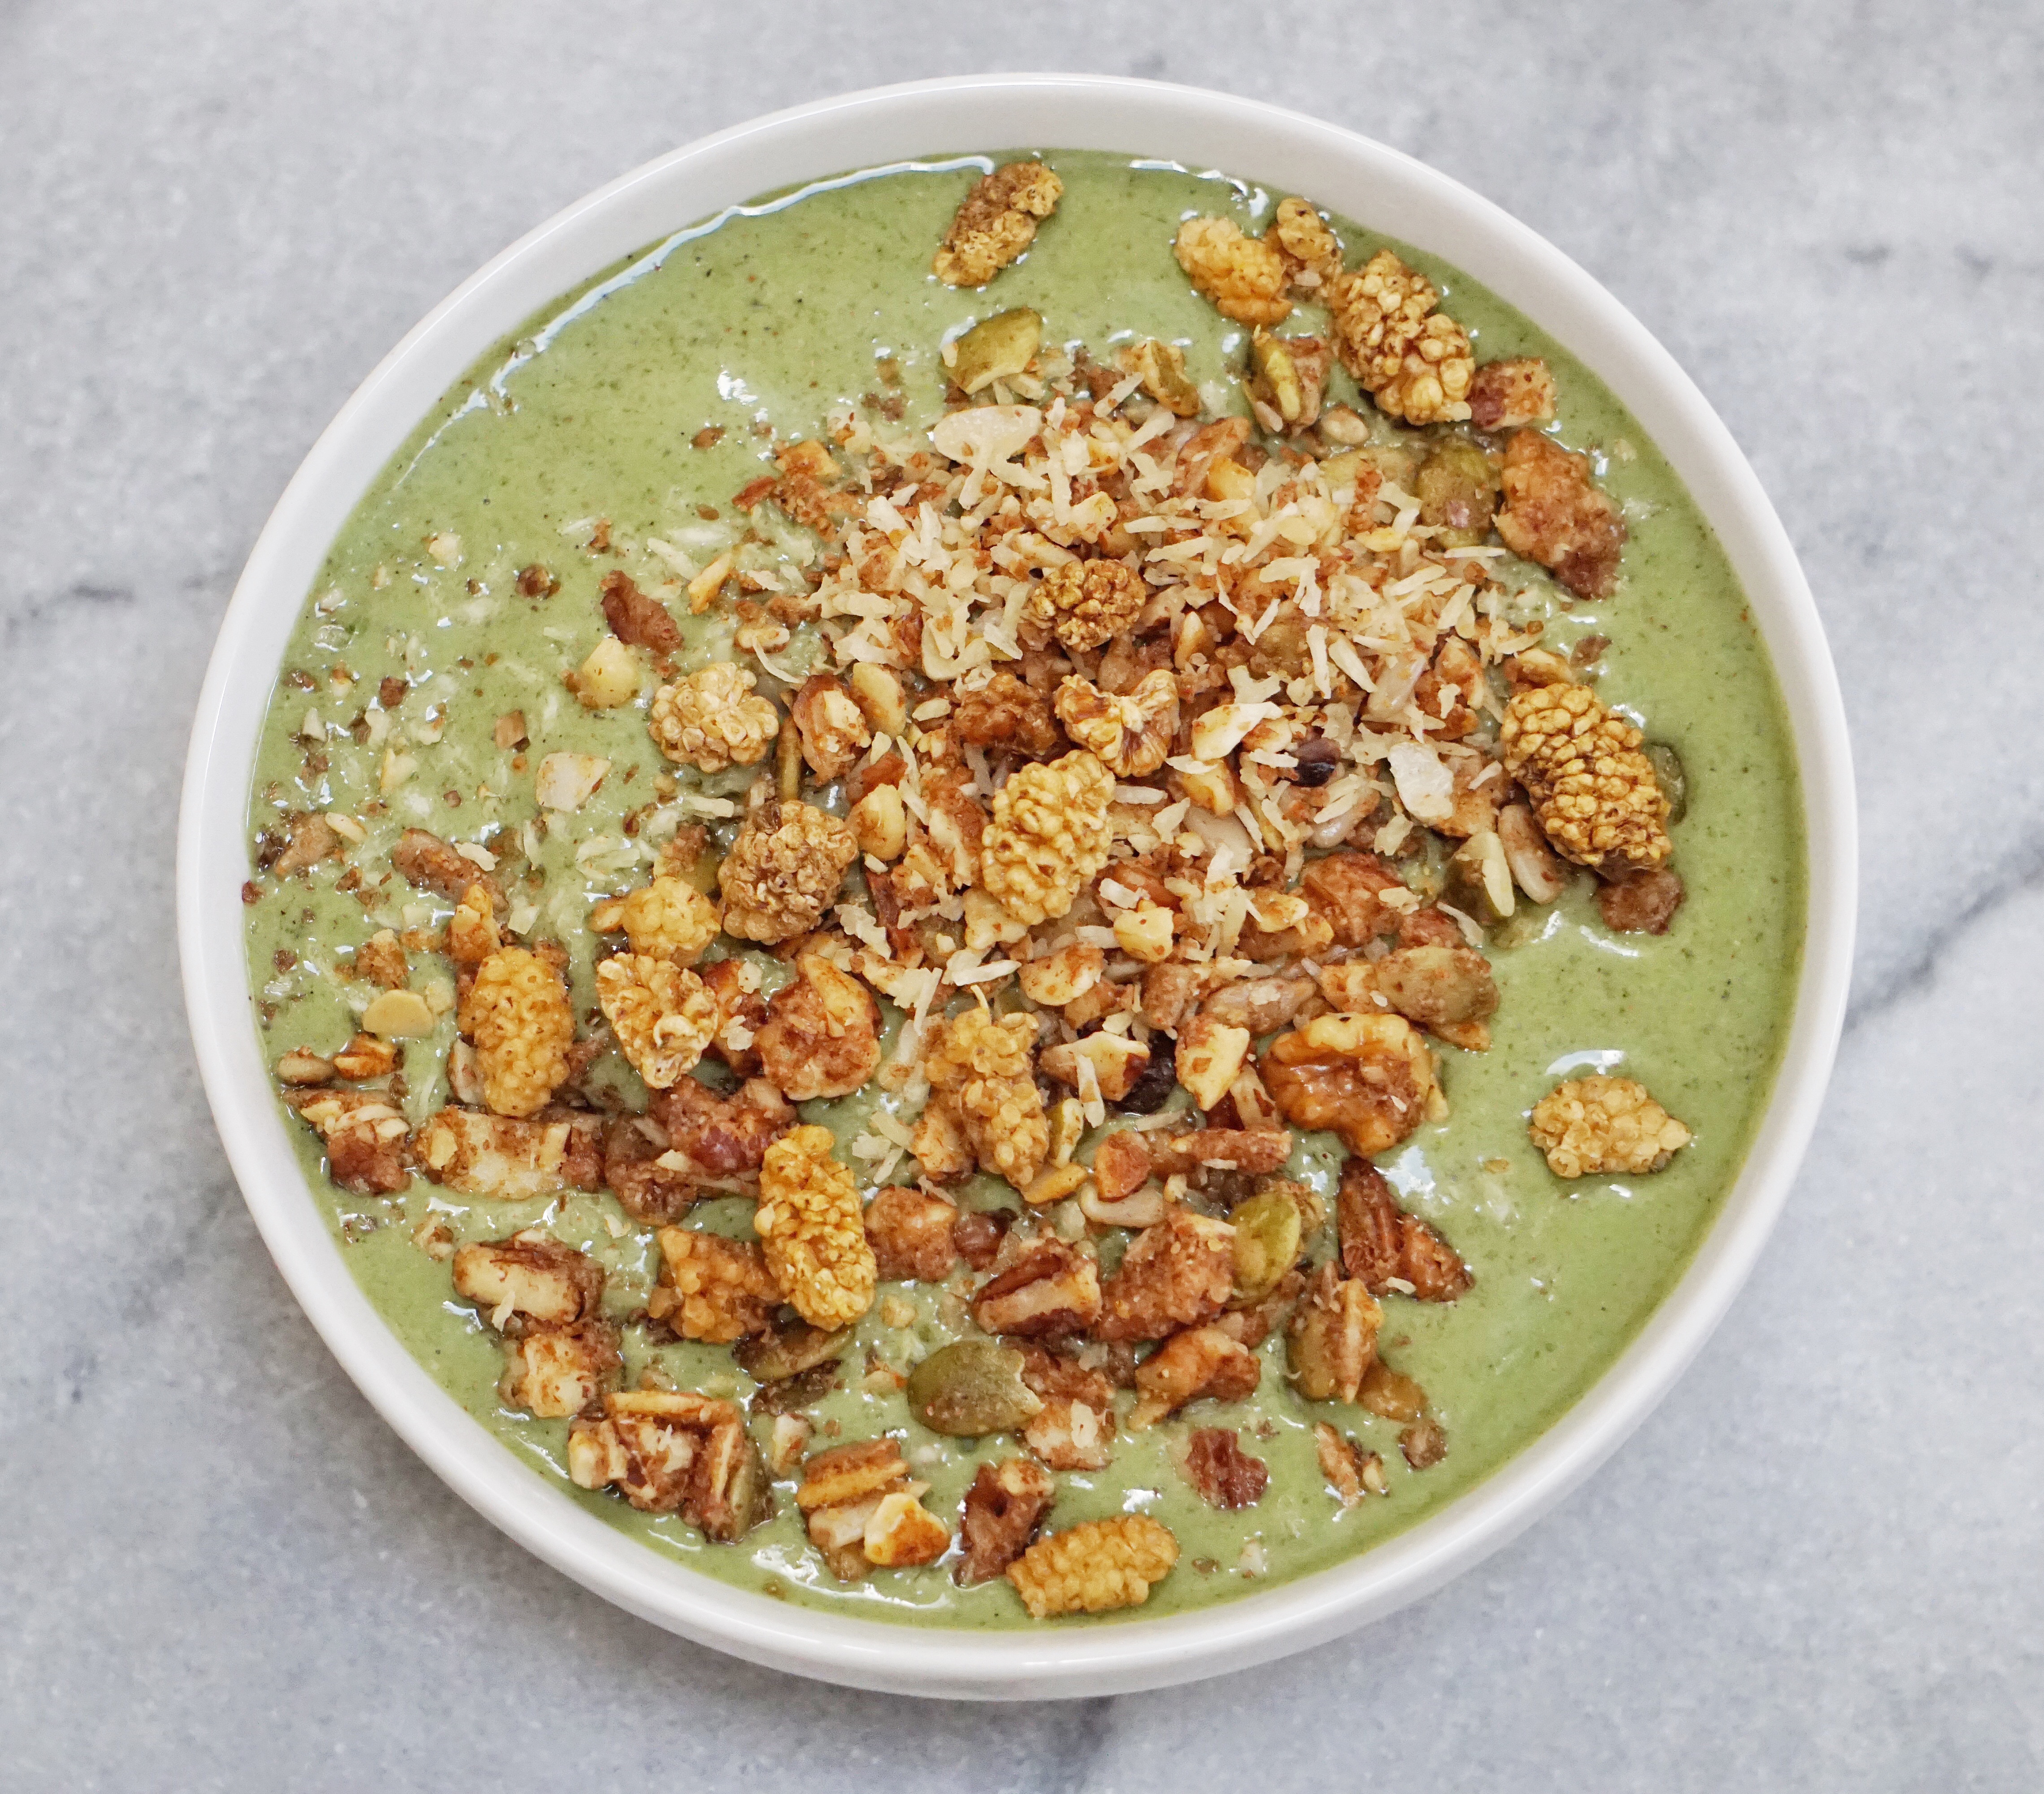 Green Smoothie Bowl Leahs Plate - Sunday Things... 2.28.16